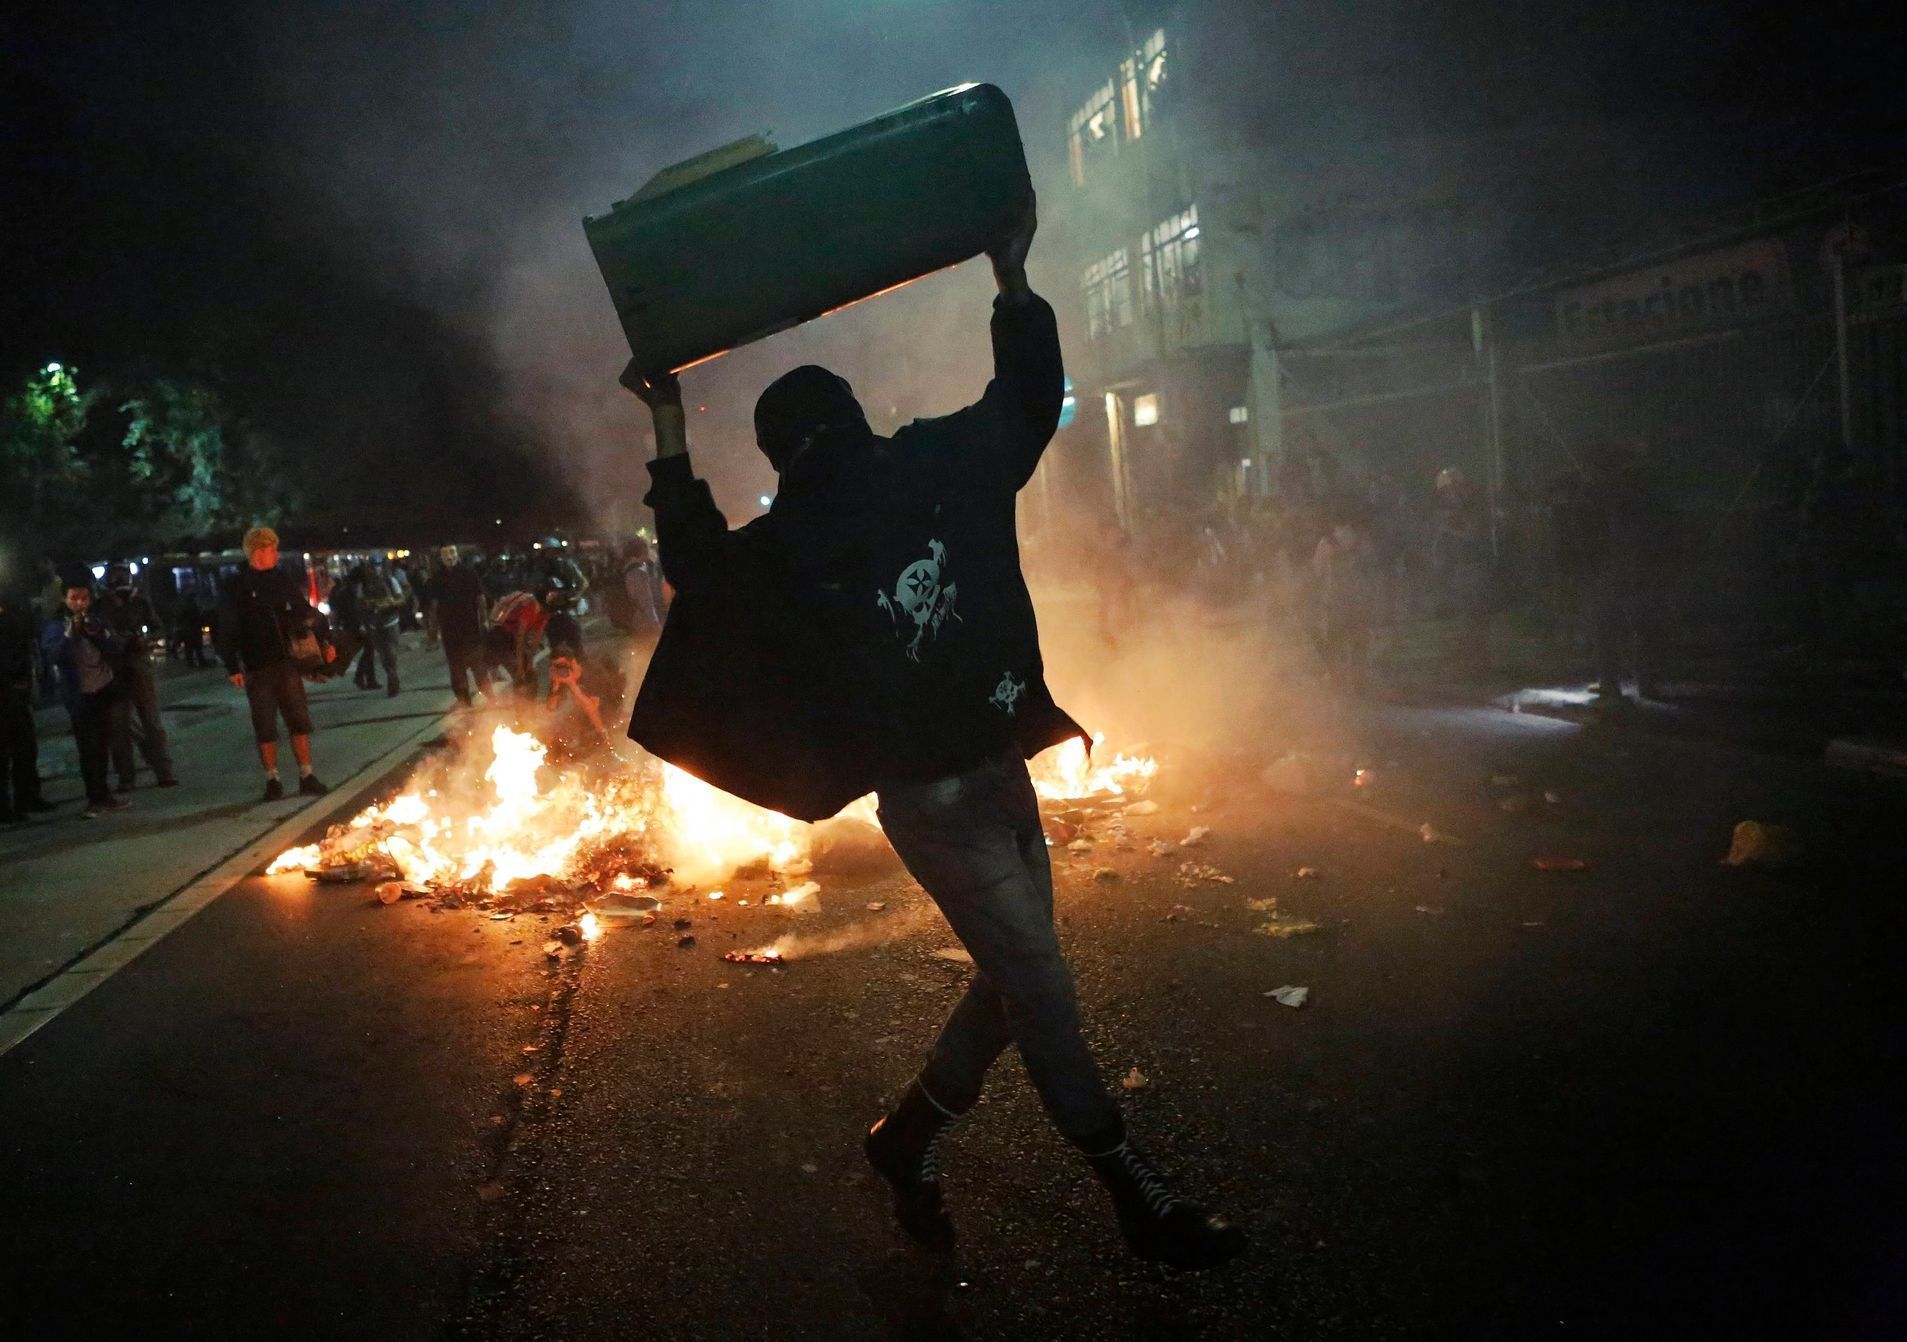 Demonstrator holds up a wastepaper bin during a protest against the 2014 World Cup, in Sao Paulo